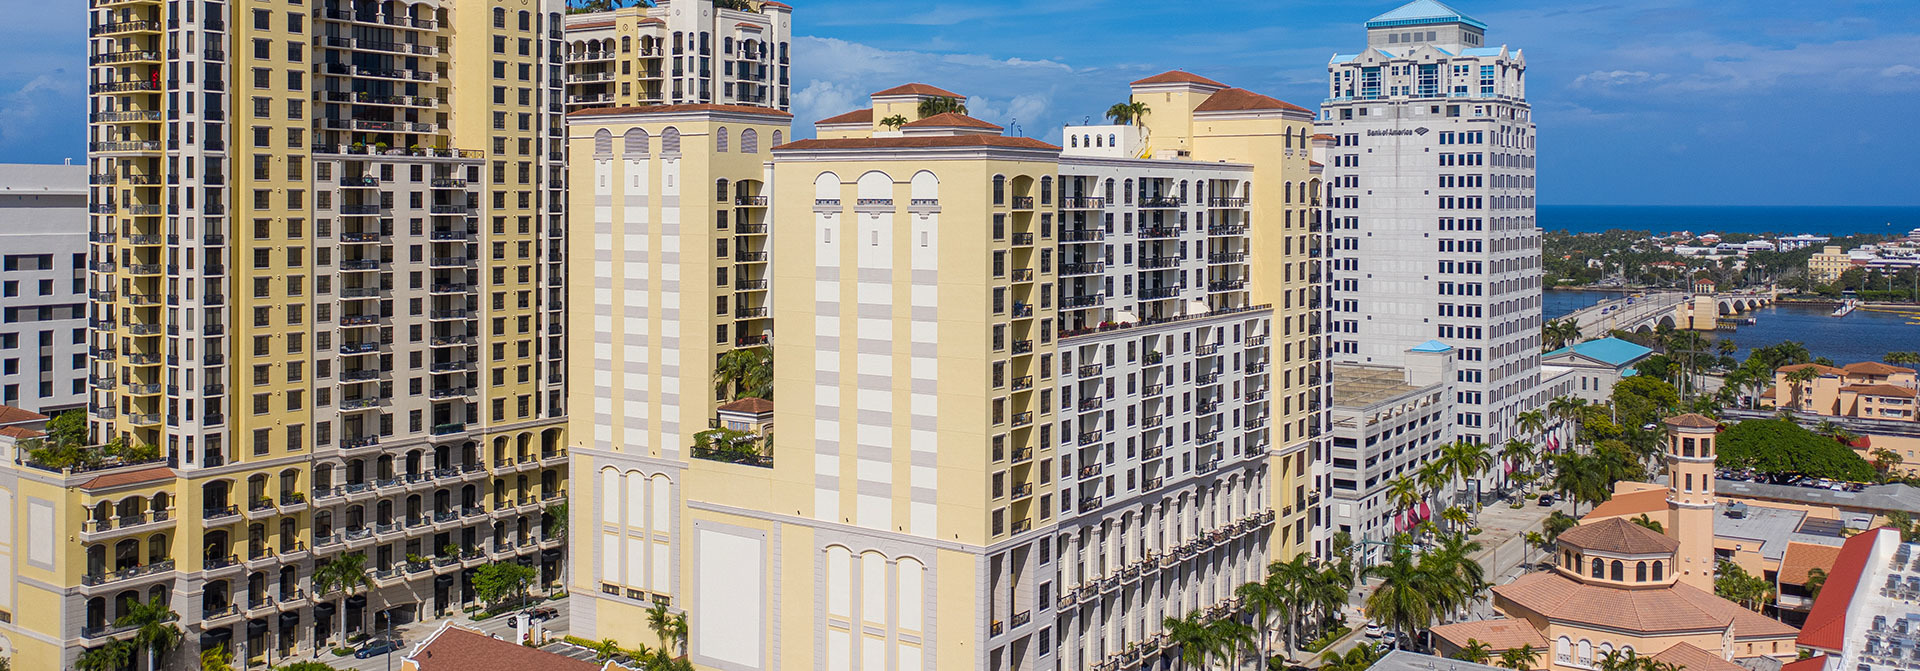 One City Plaza West Palm Beach Luxury Condos For Sale